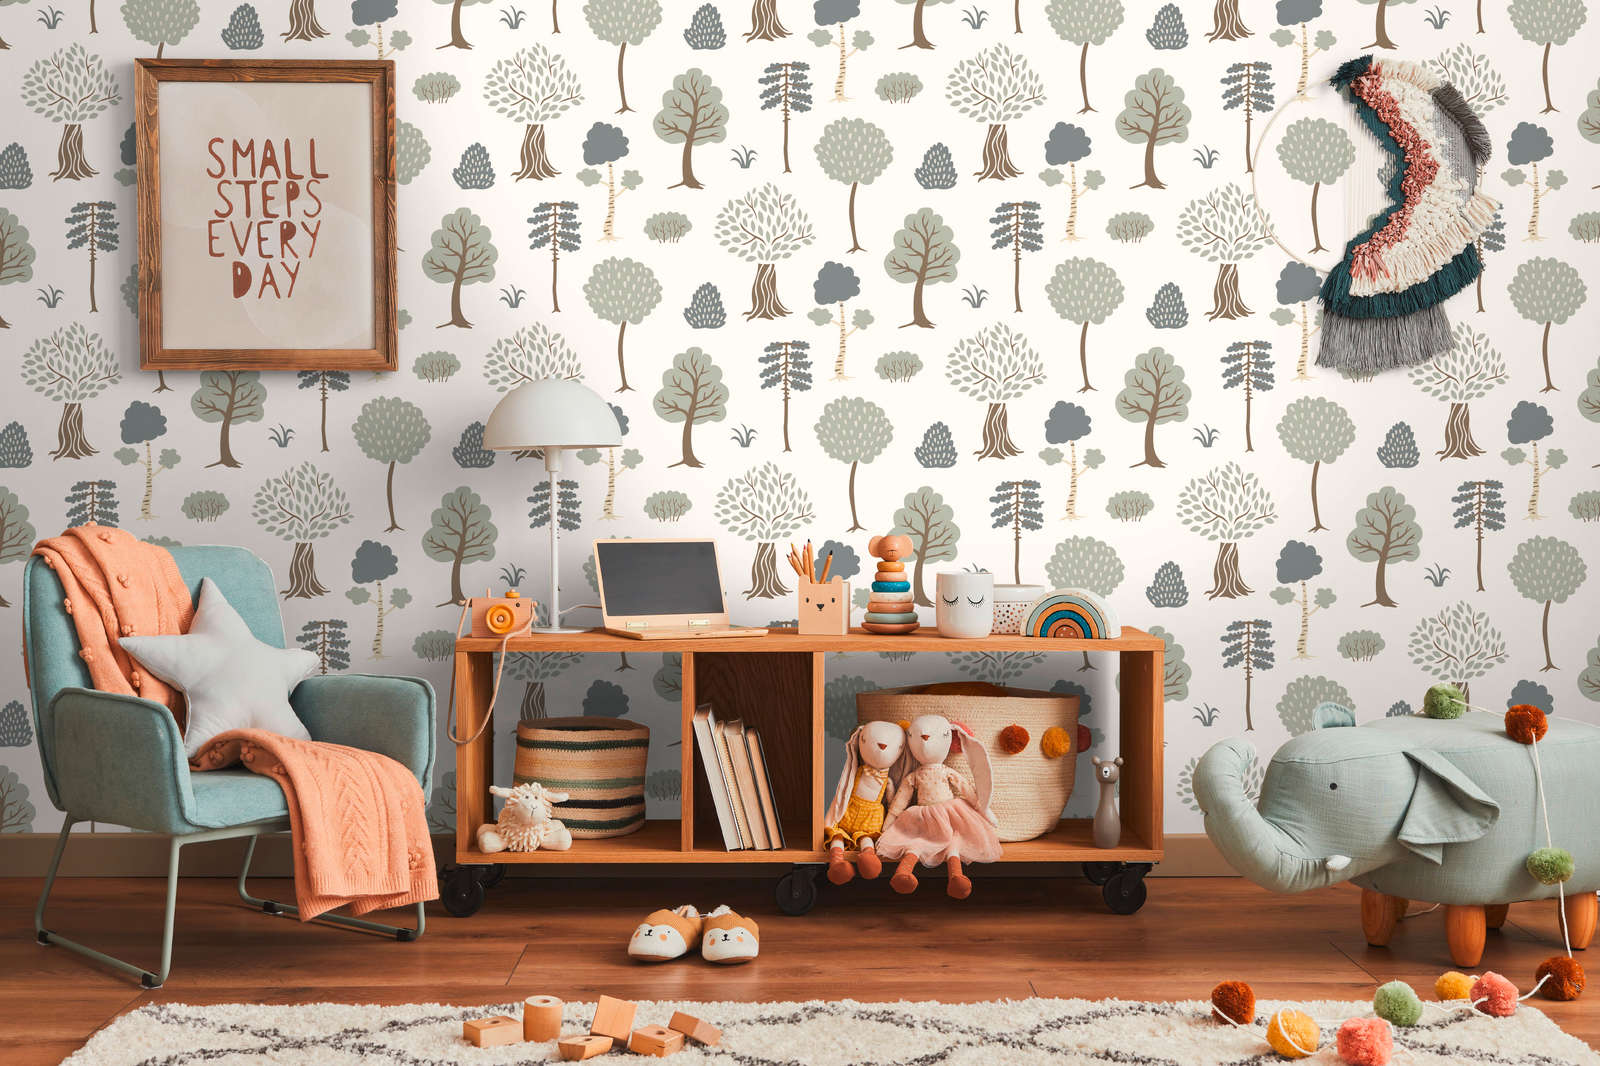             Non-woven wallpaper with minimalist forest motif with trees - cream, green, brown
        